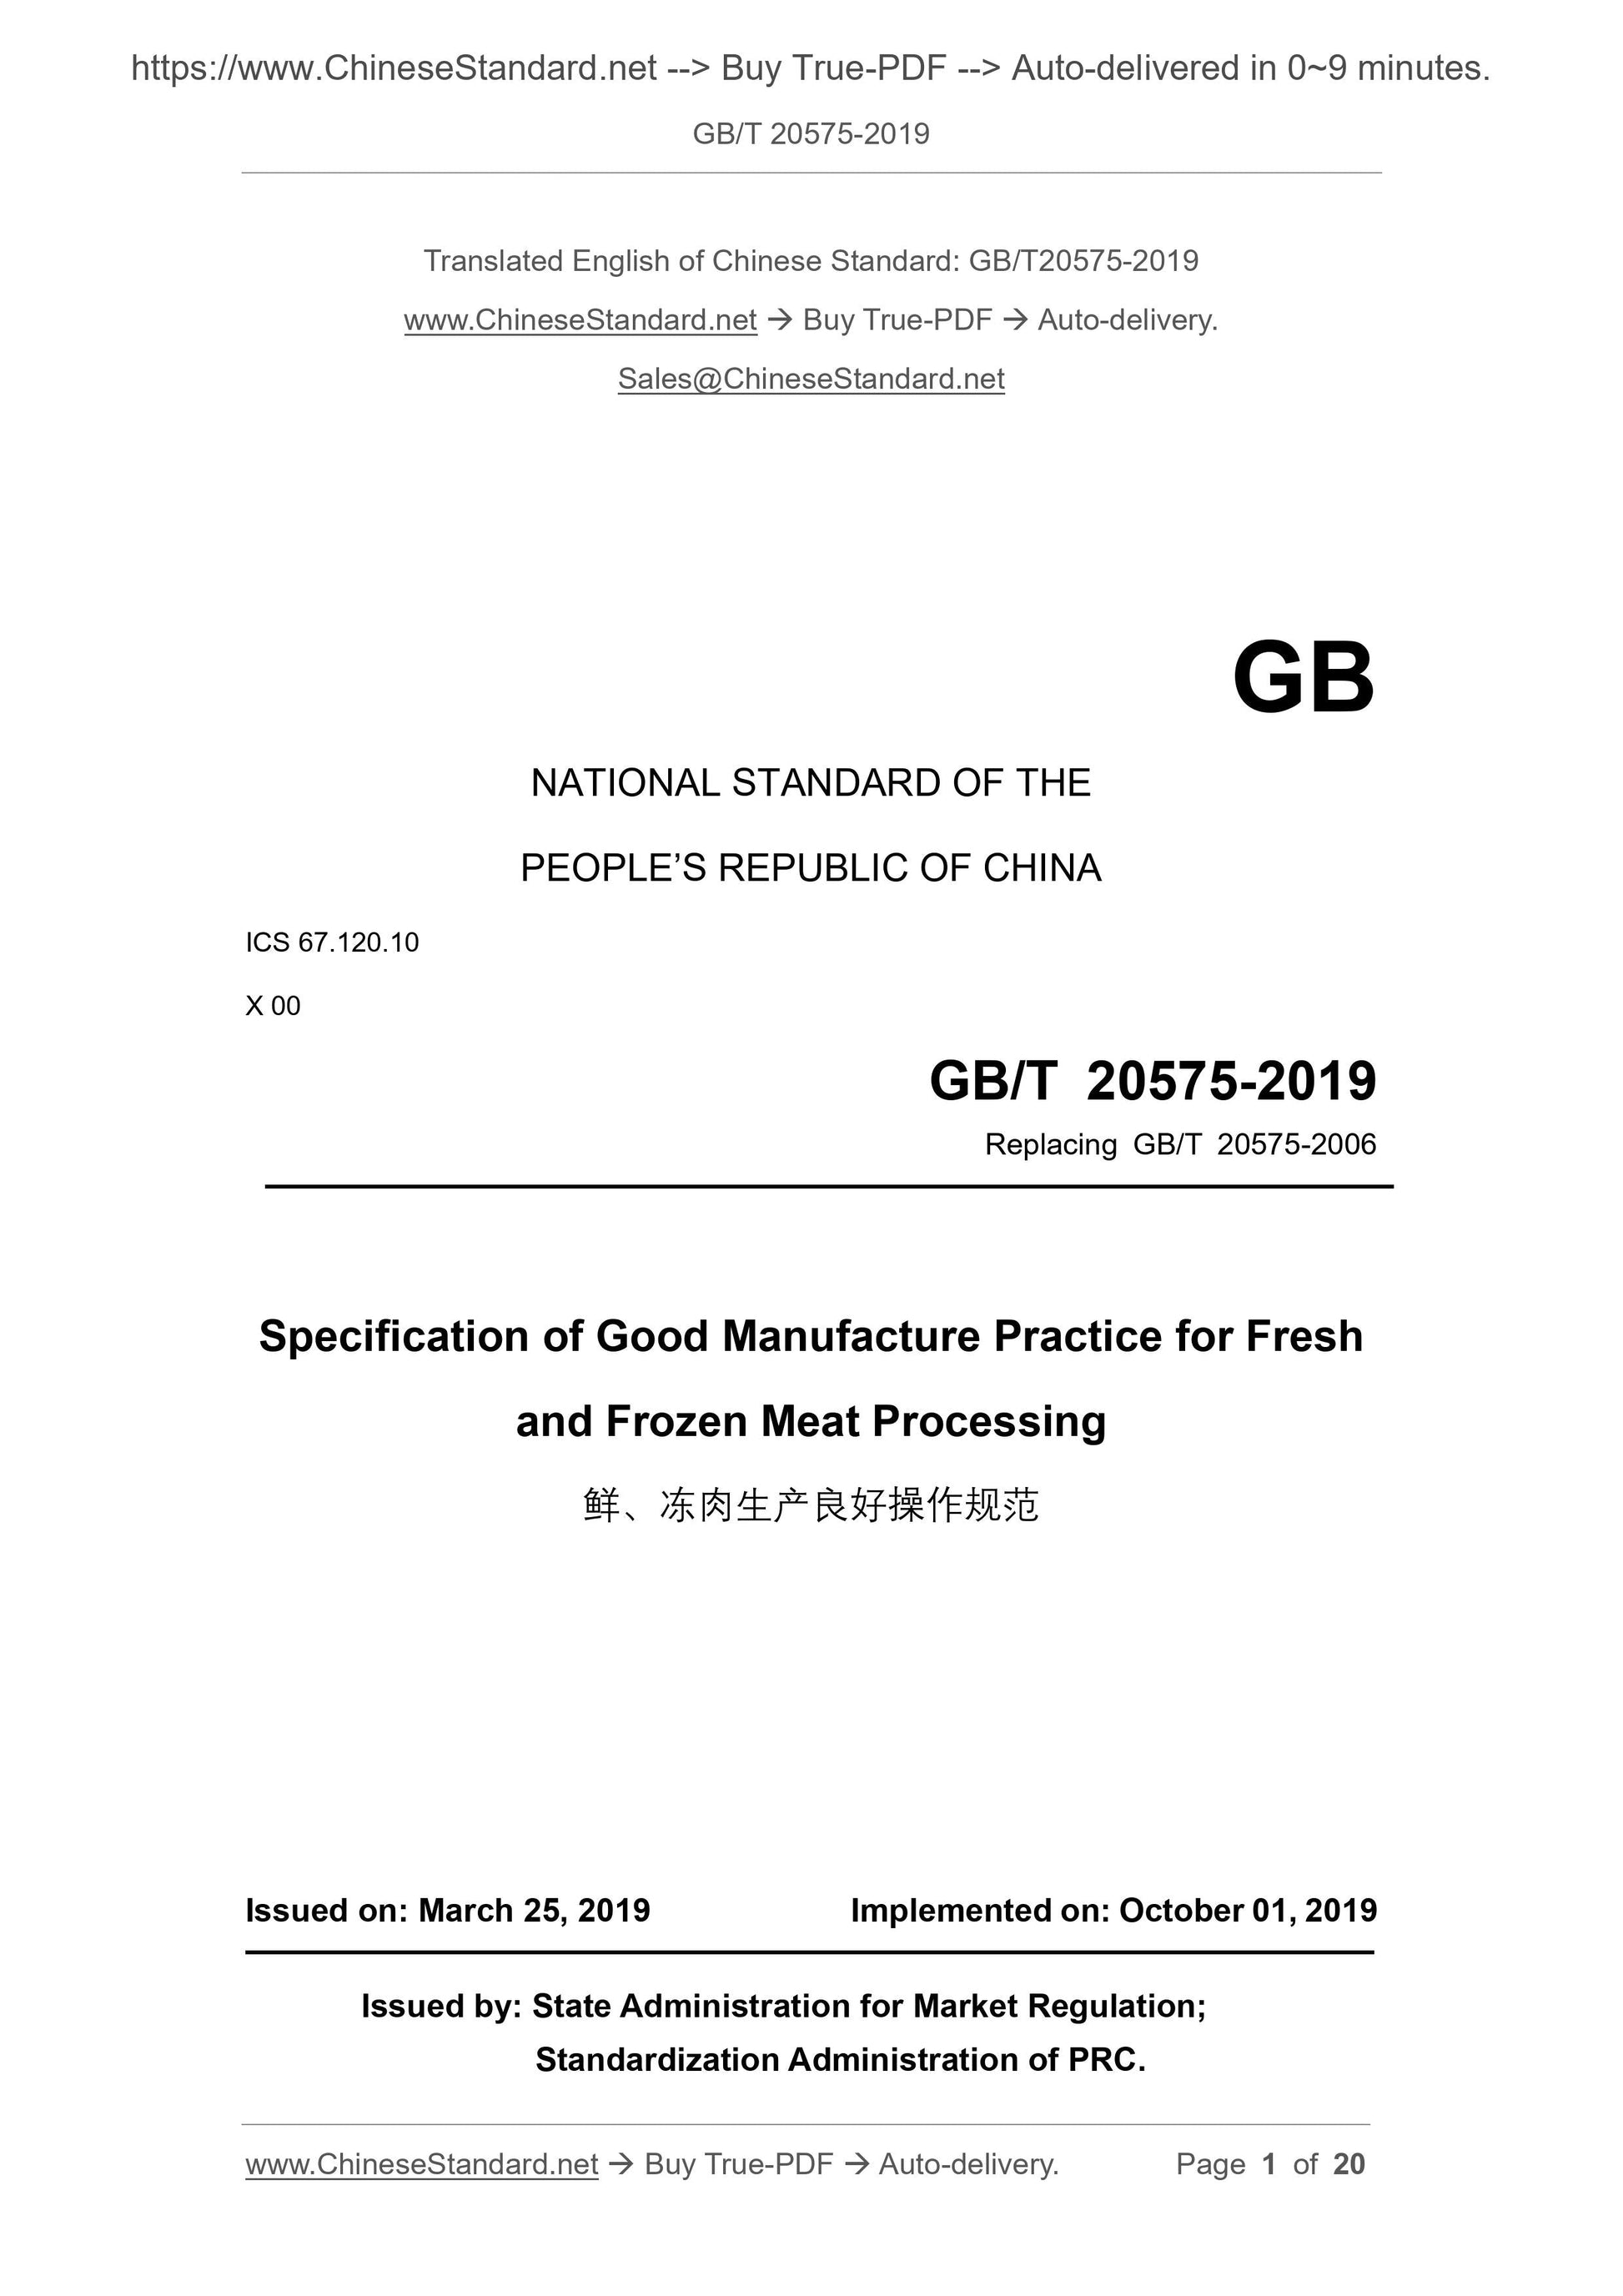 GB/T 20575-2019 Page 1